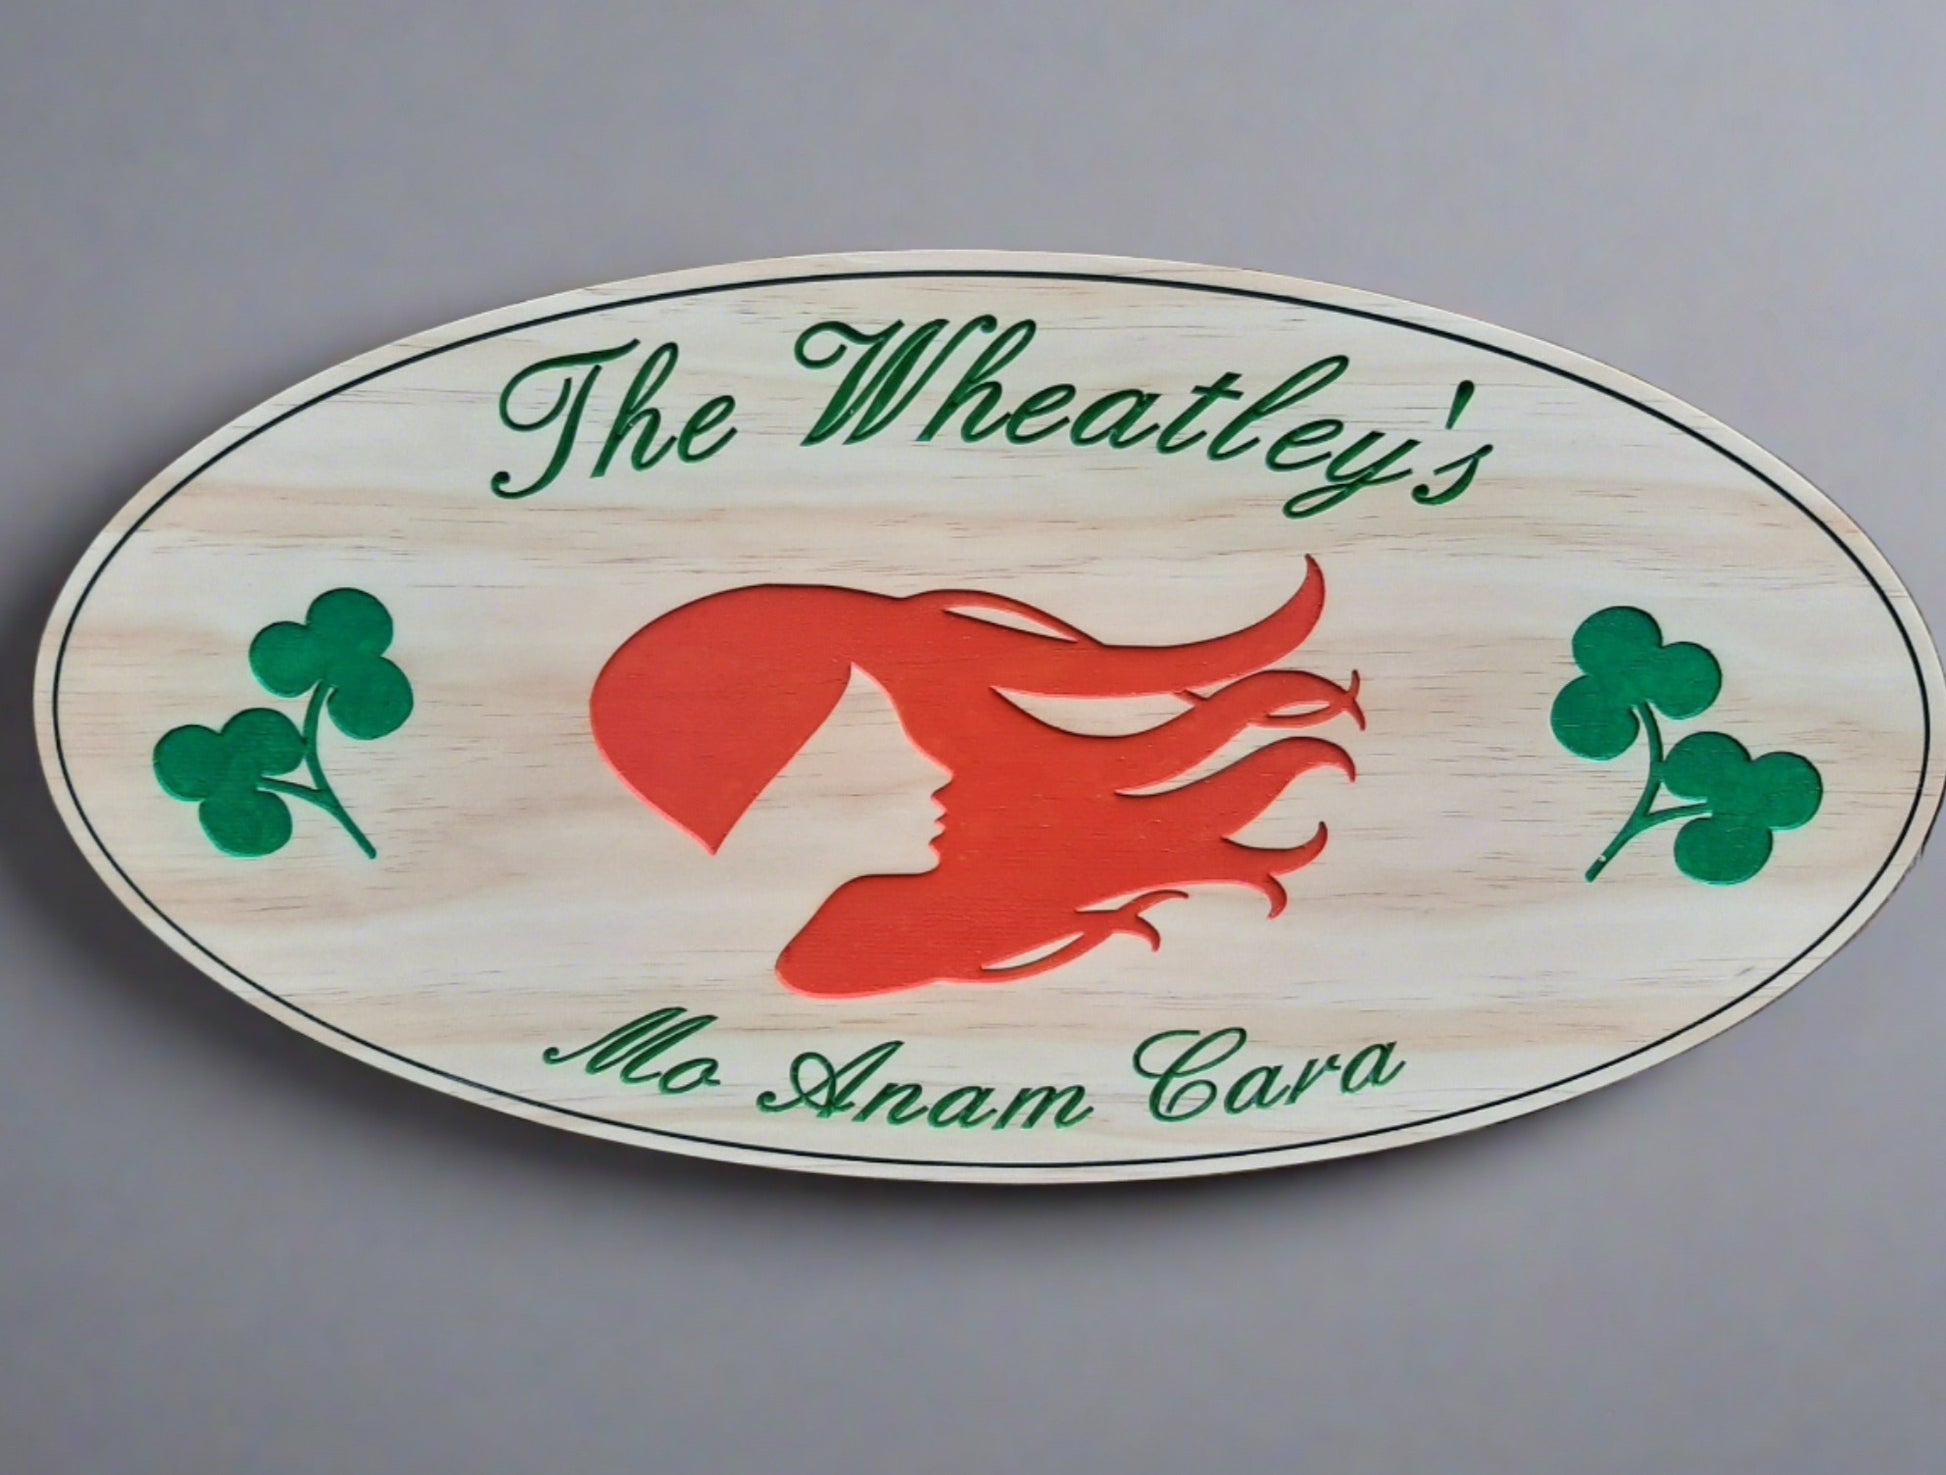 Custom wood carved wood engraved Irish Family Name plaque. Buy Last Name signs with confidence. Made in the USA.